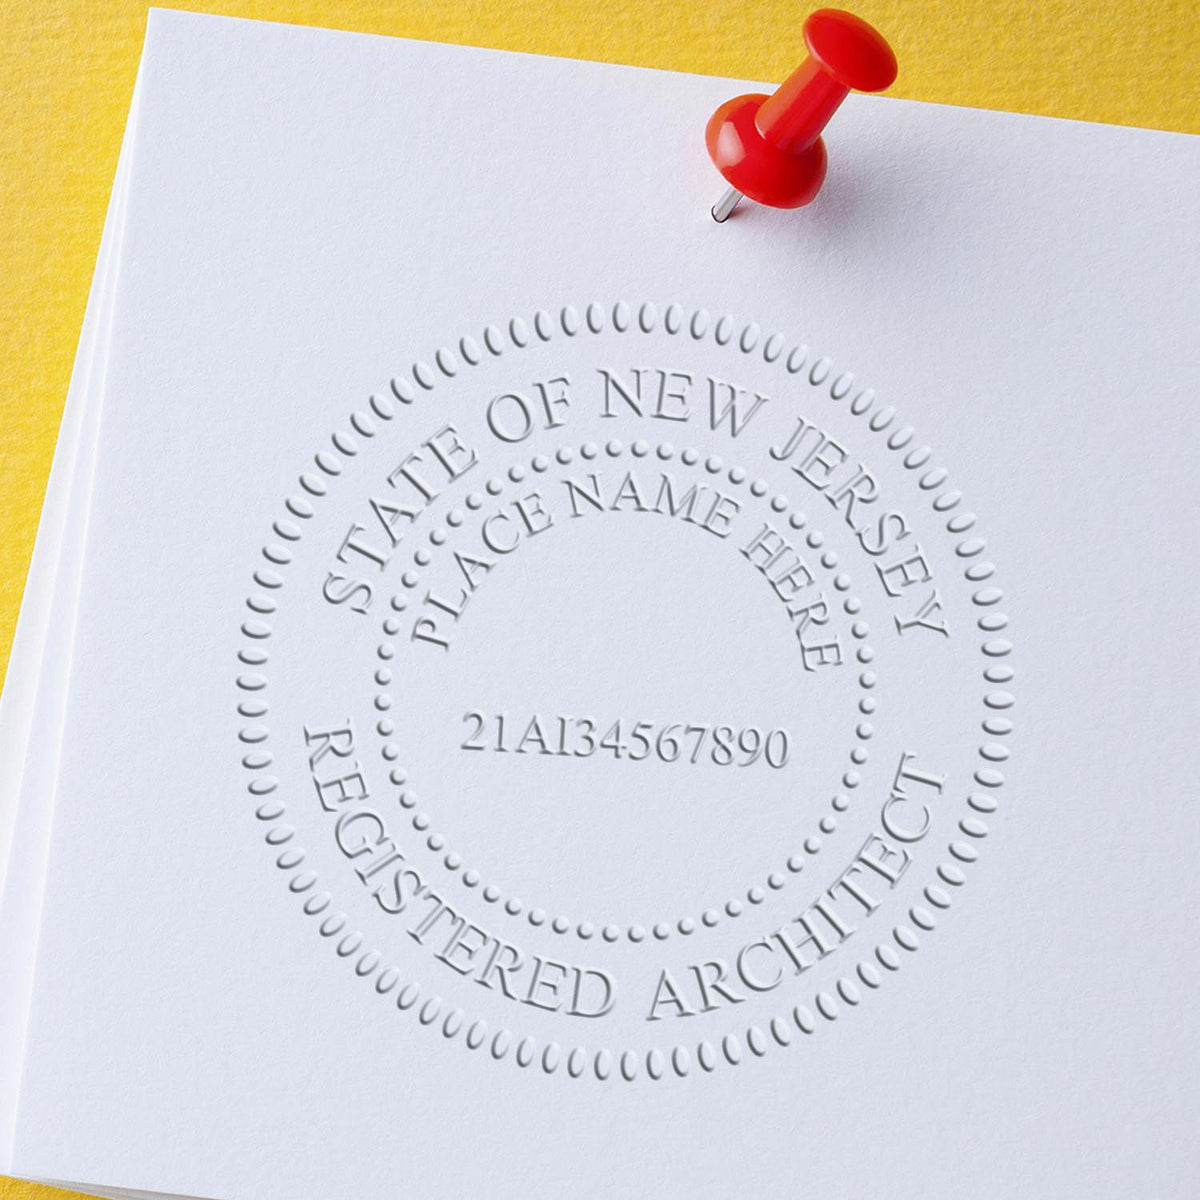 This paper is stamped with a sample imprint of the Extended Long Reach New Jersey Architect Seal Embosser, signifying its quality and reliability.